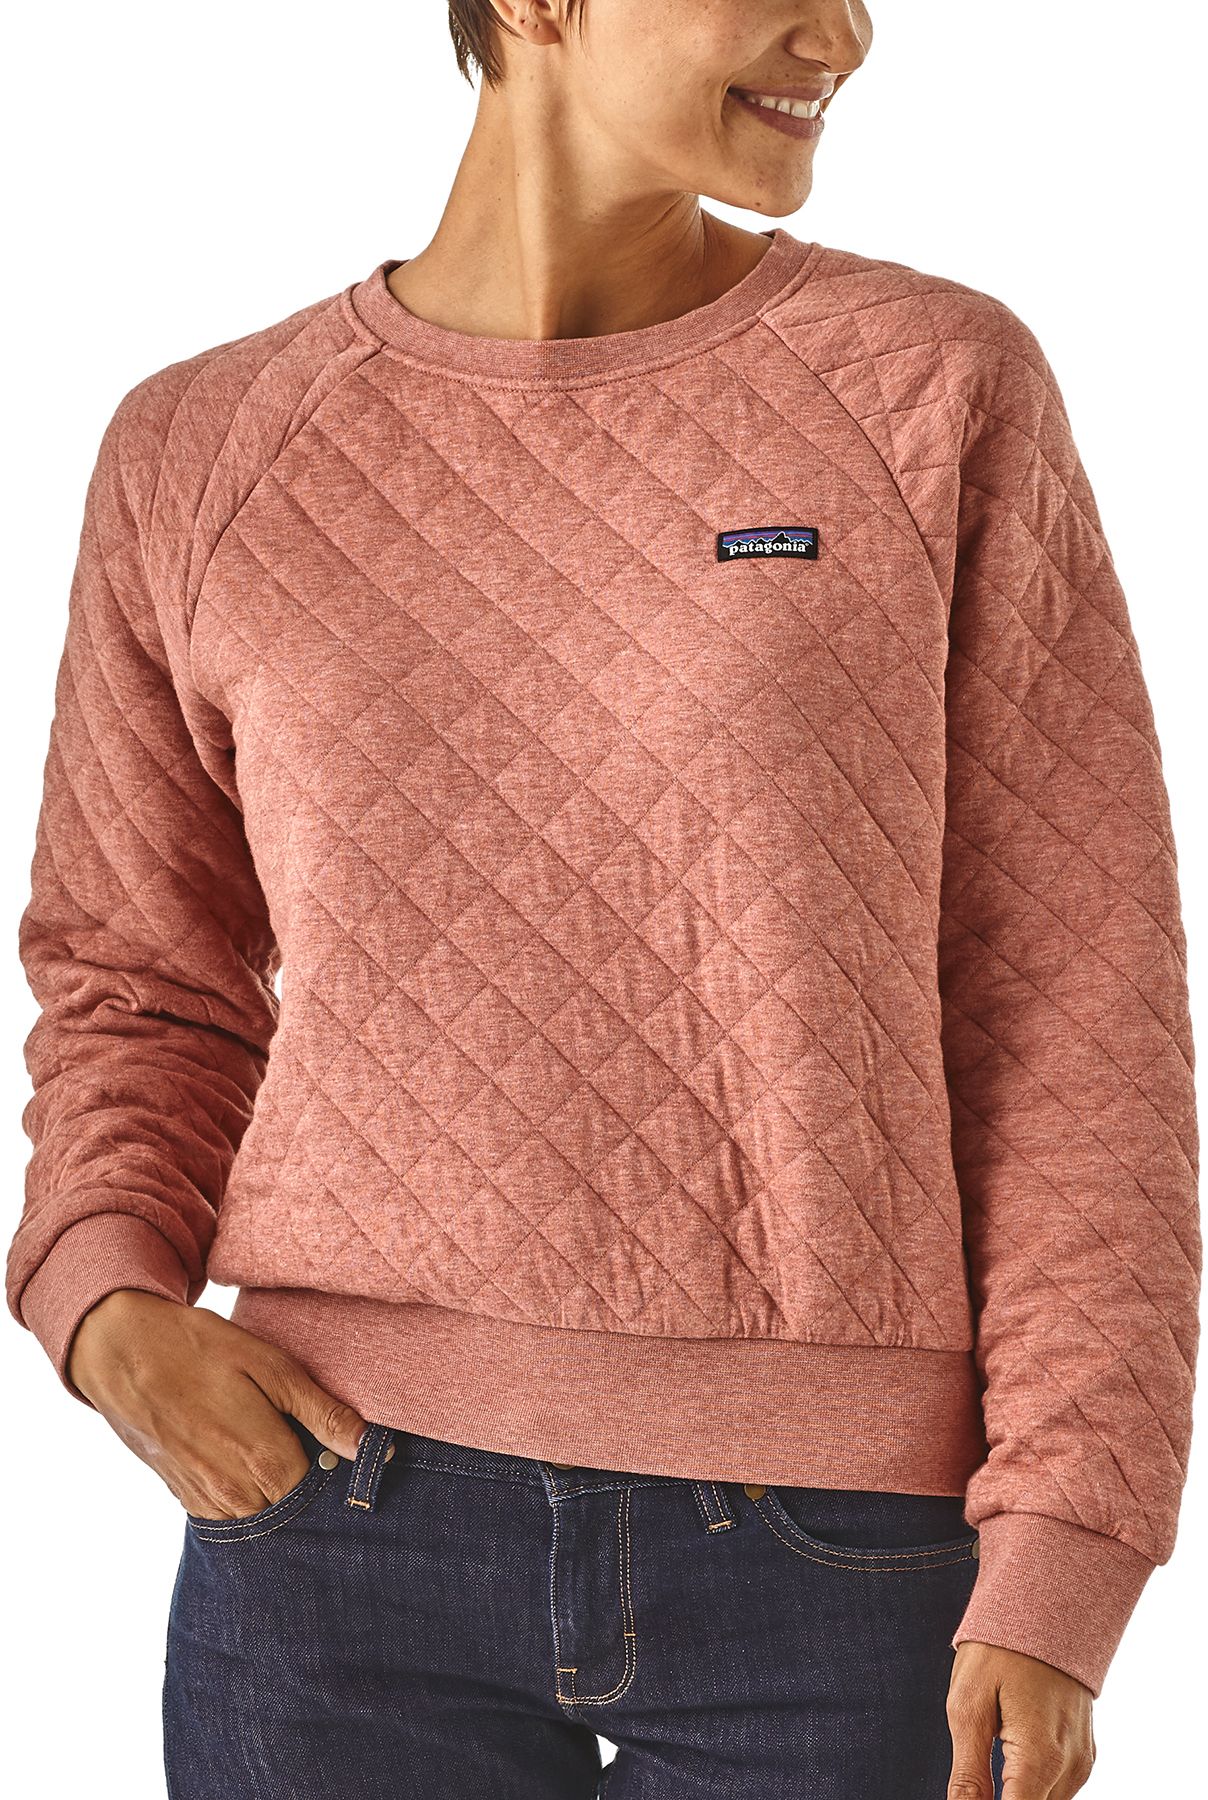 patagonia quilted full zip